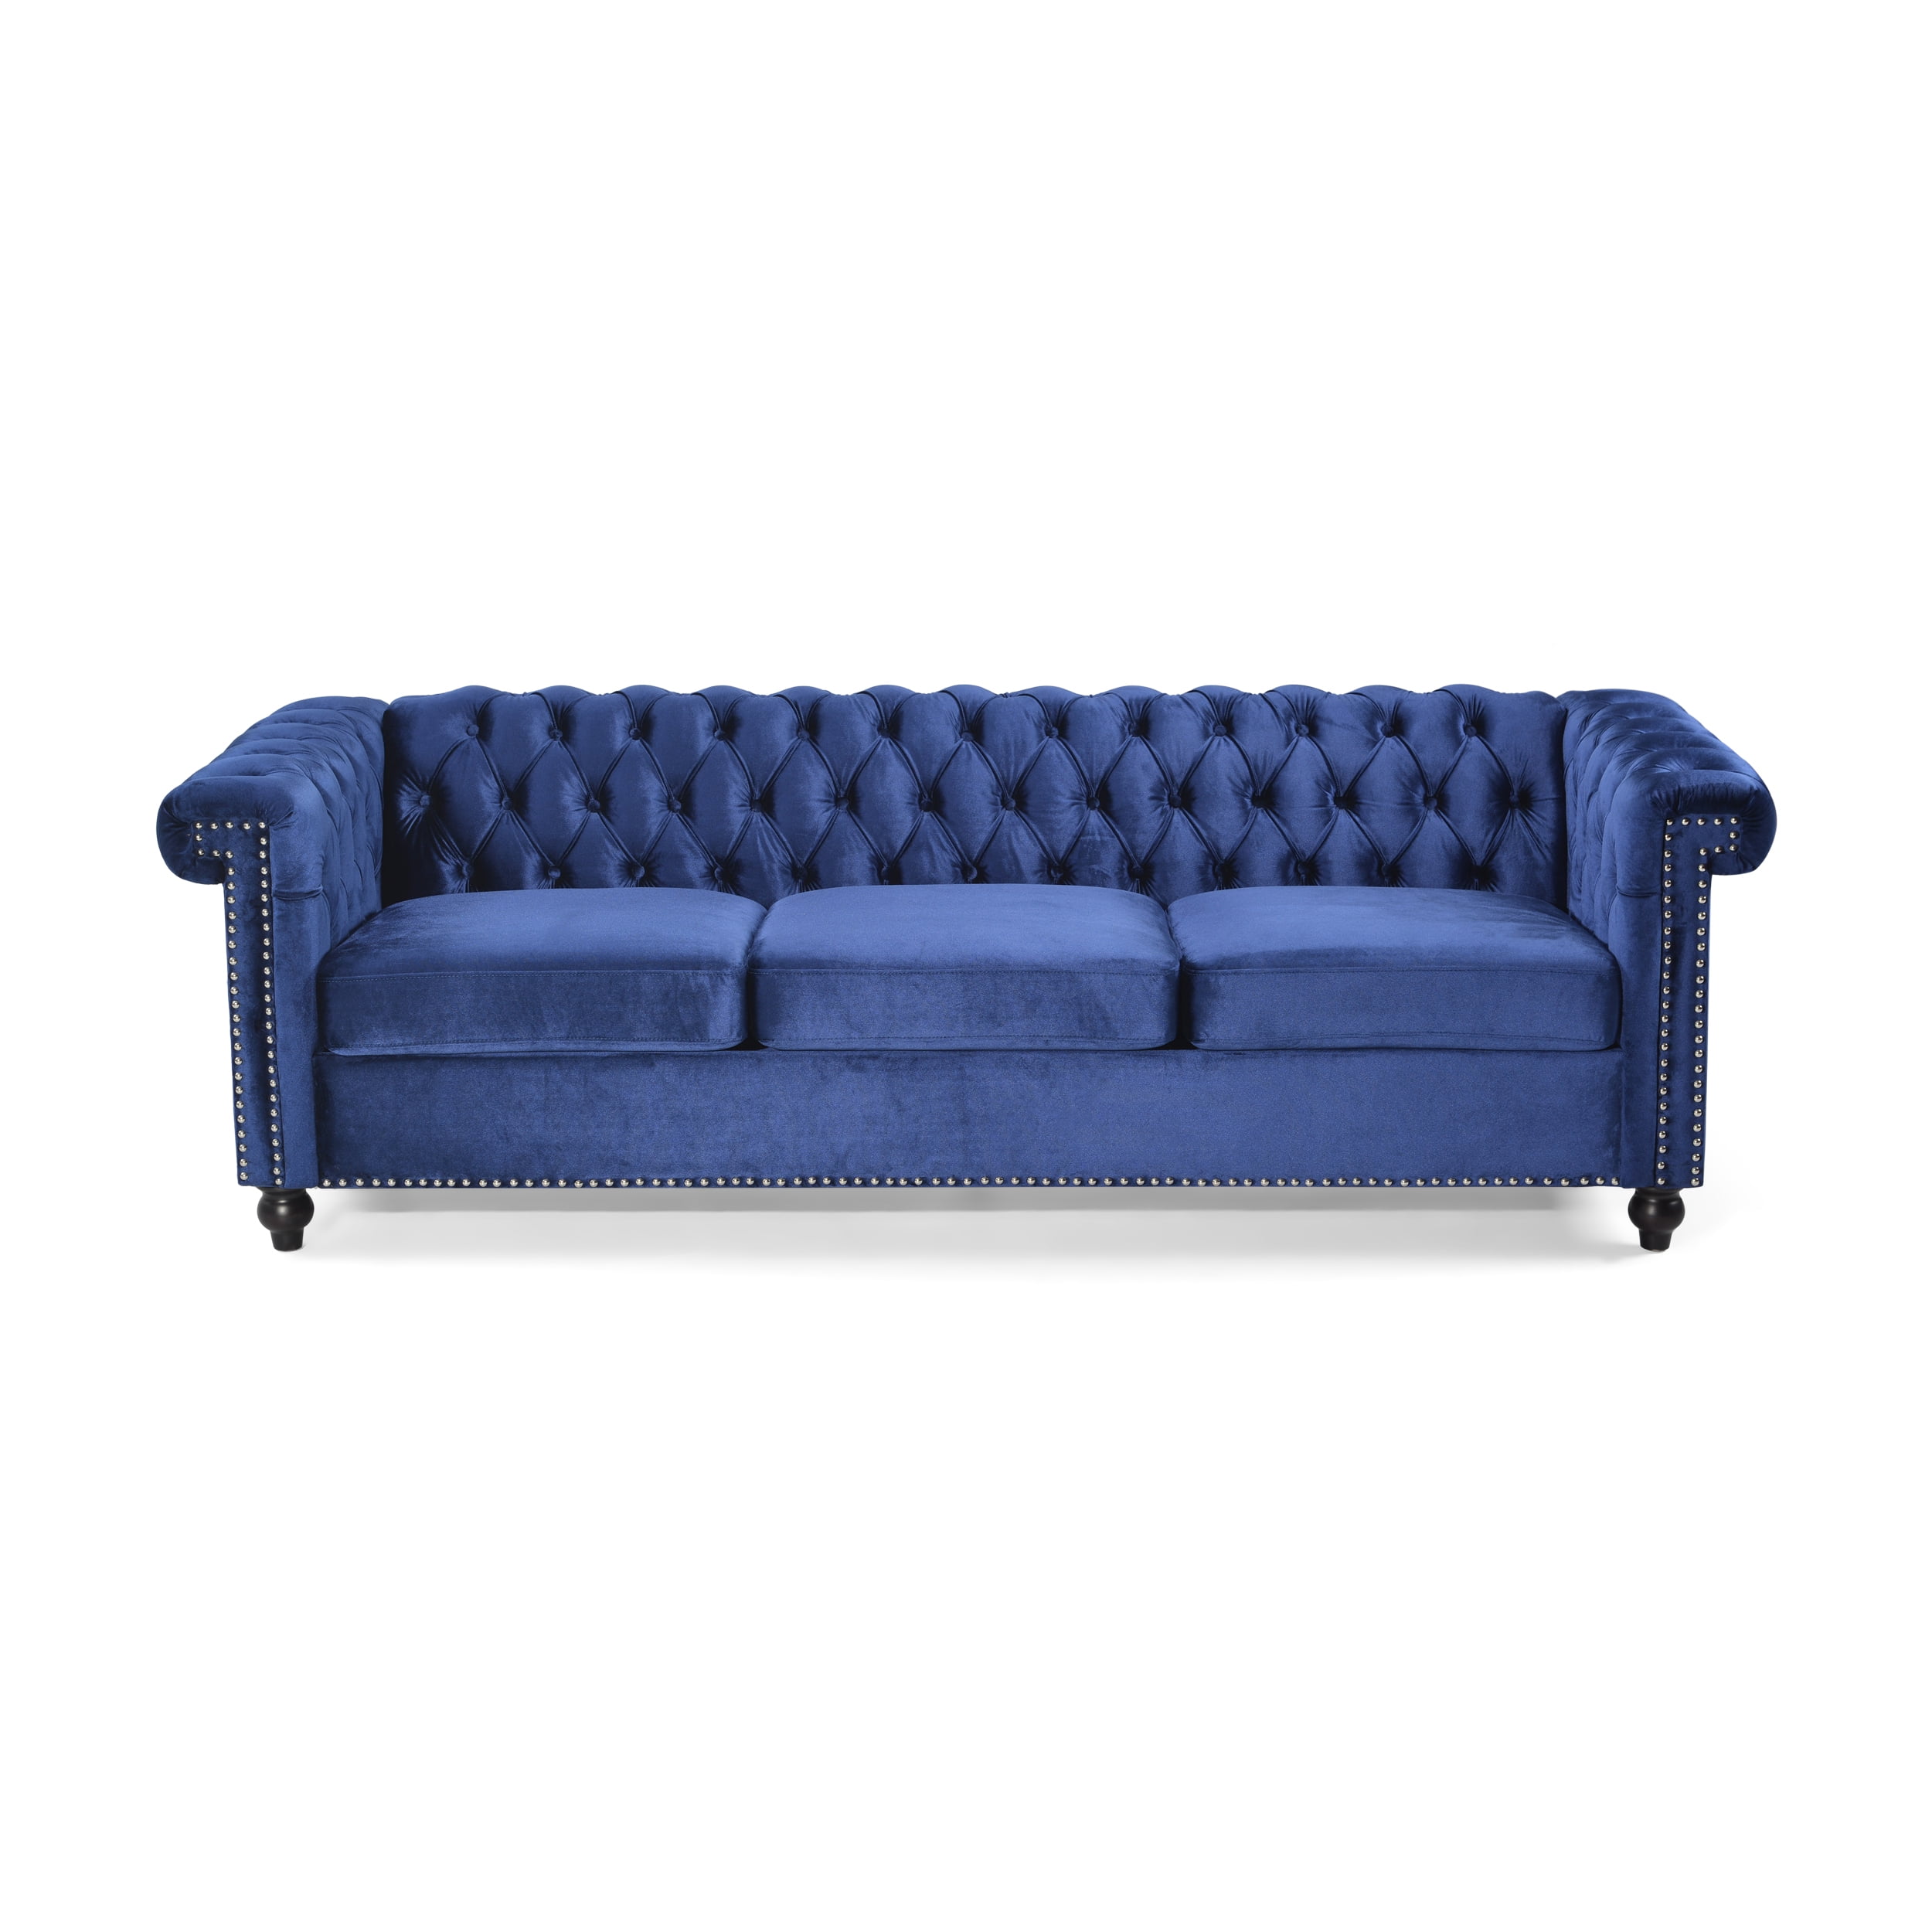 GDF Studio Anders Tufted Chesterfield Velvet 3 Seater Sofa, Midnight Blue  and Dark Brown